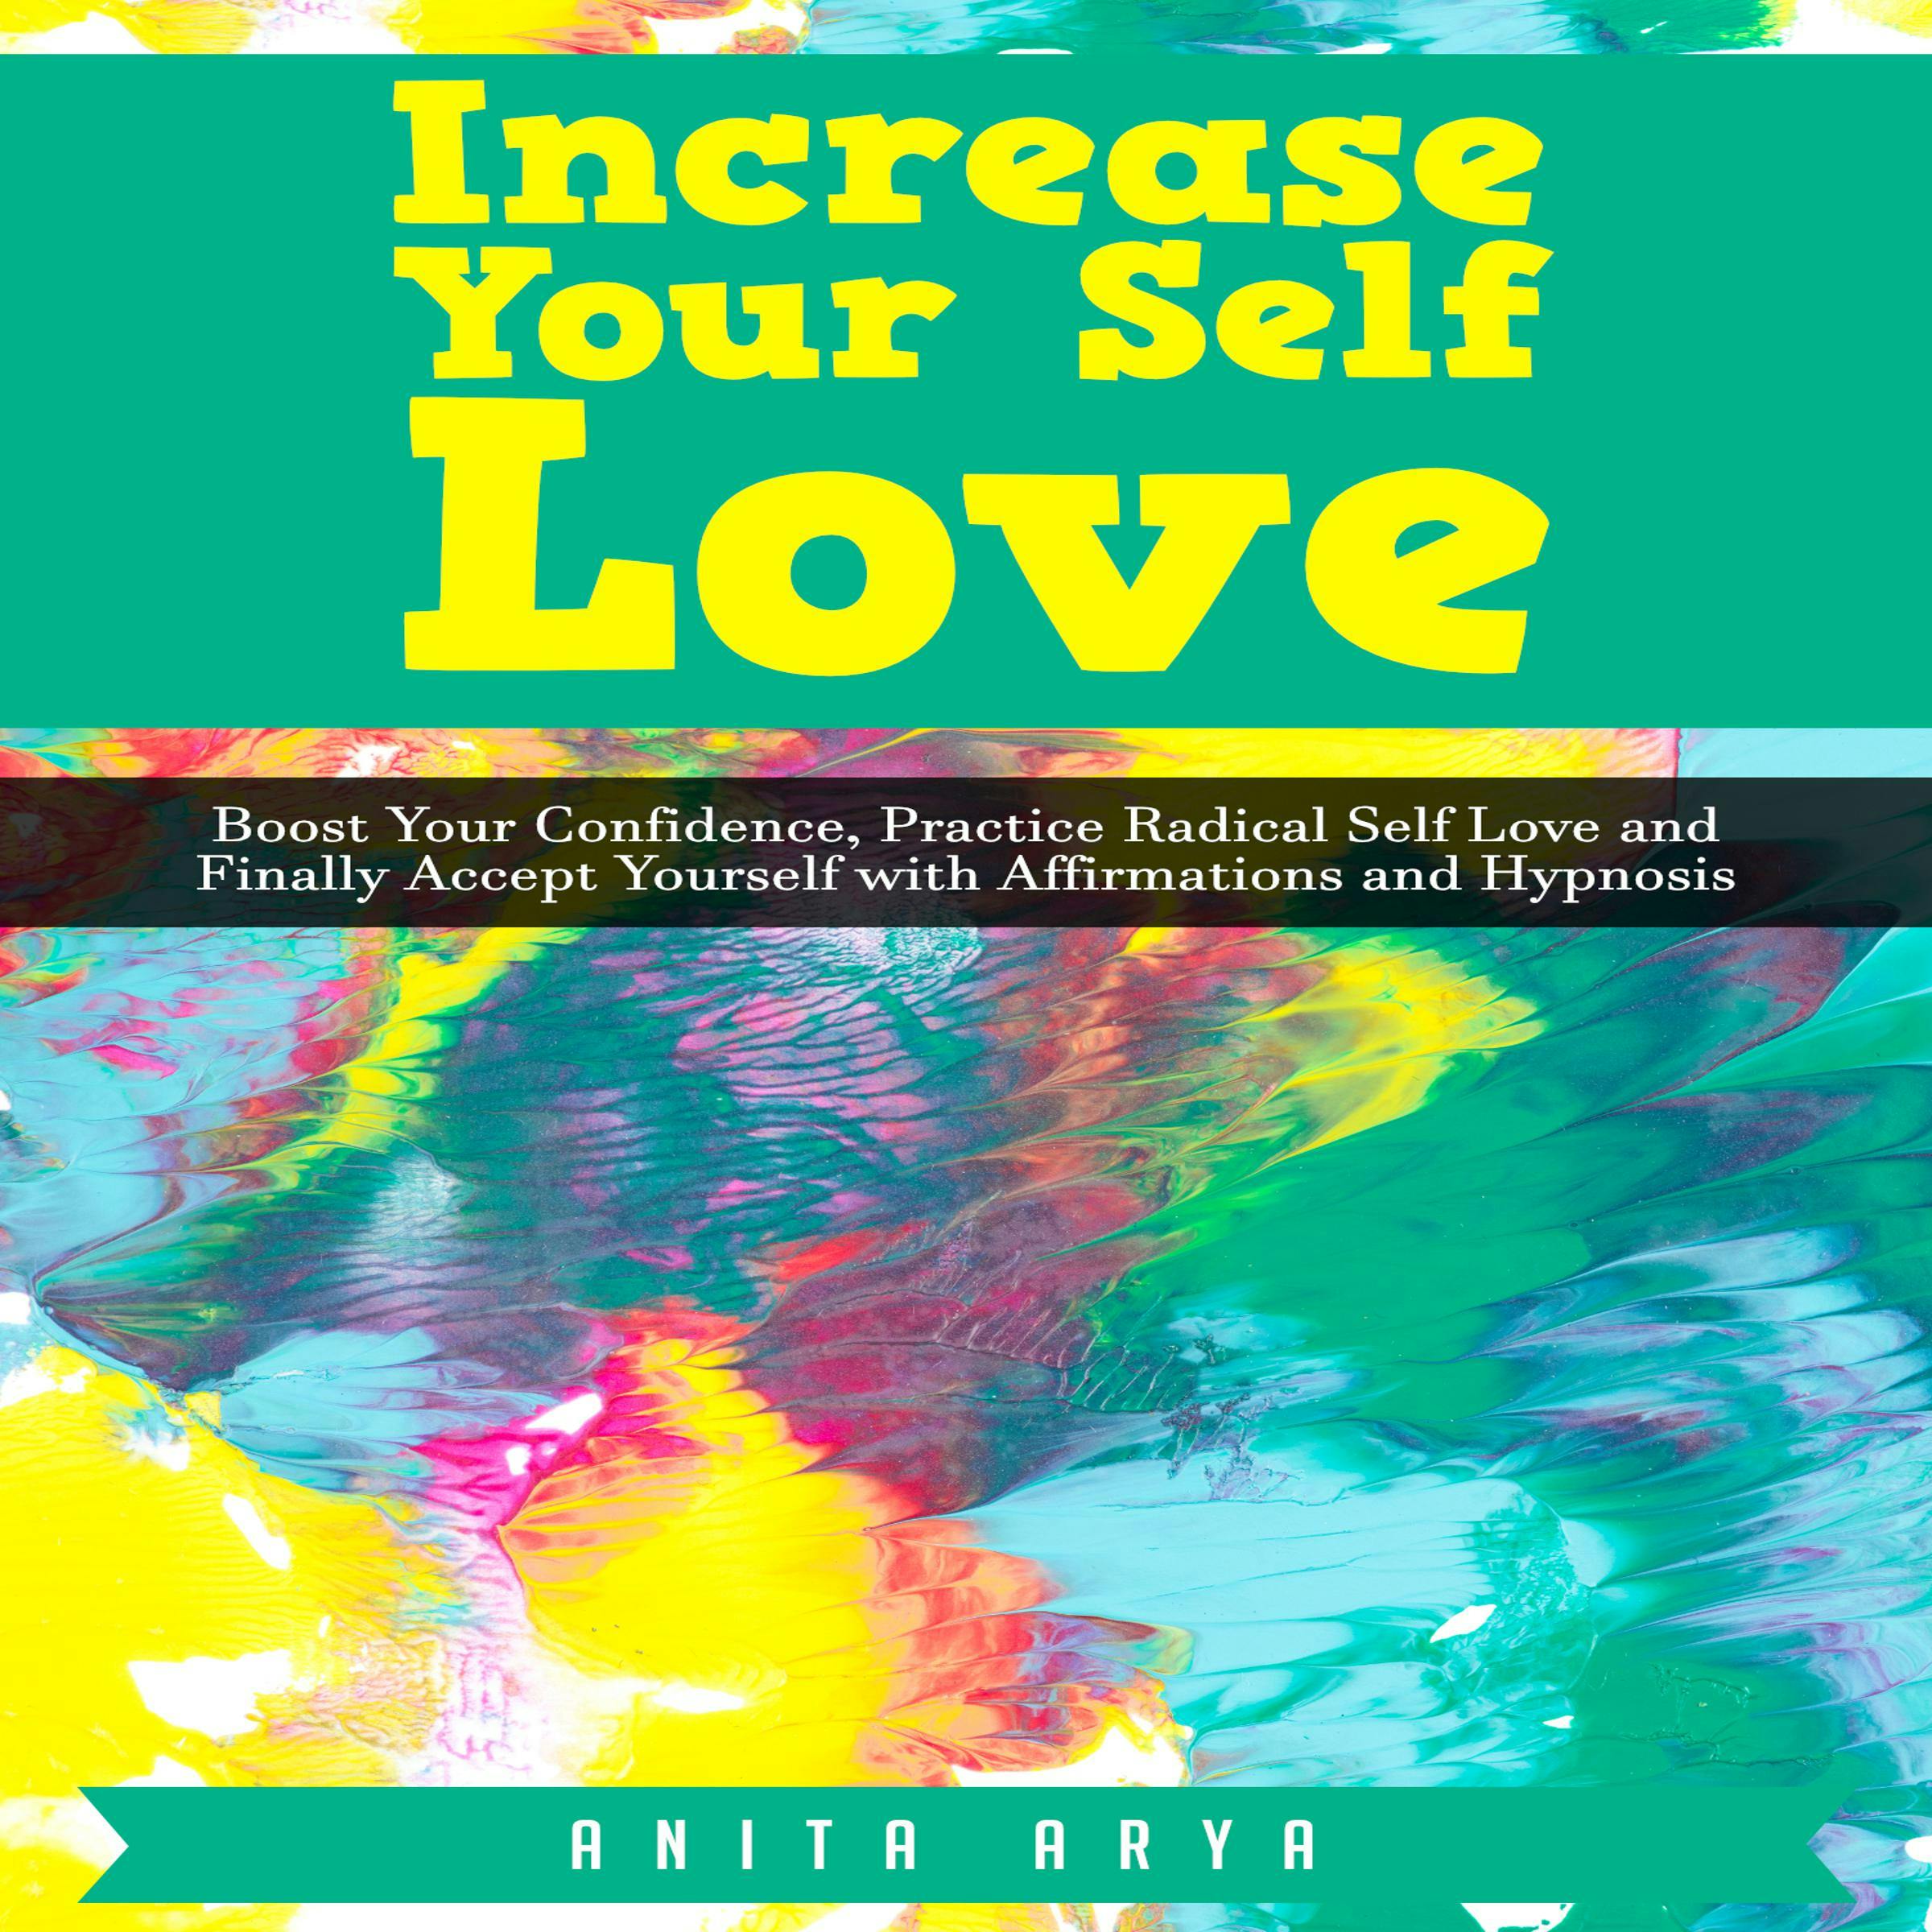 Increase Your Self Love: Boost Your Confidence, Practice Radical Self Love and Finally Accept Yourself with Affirmations and Hypnosis - Anita Arya